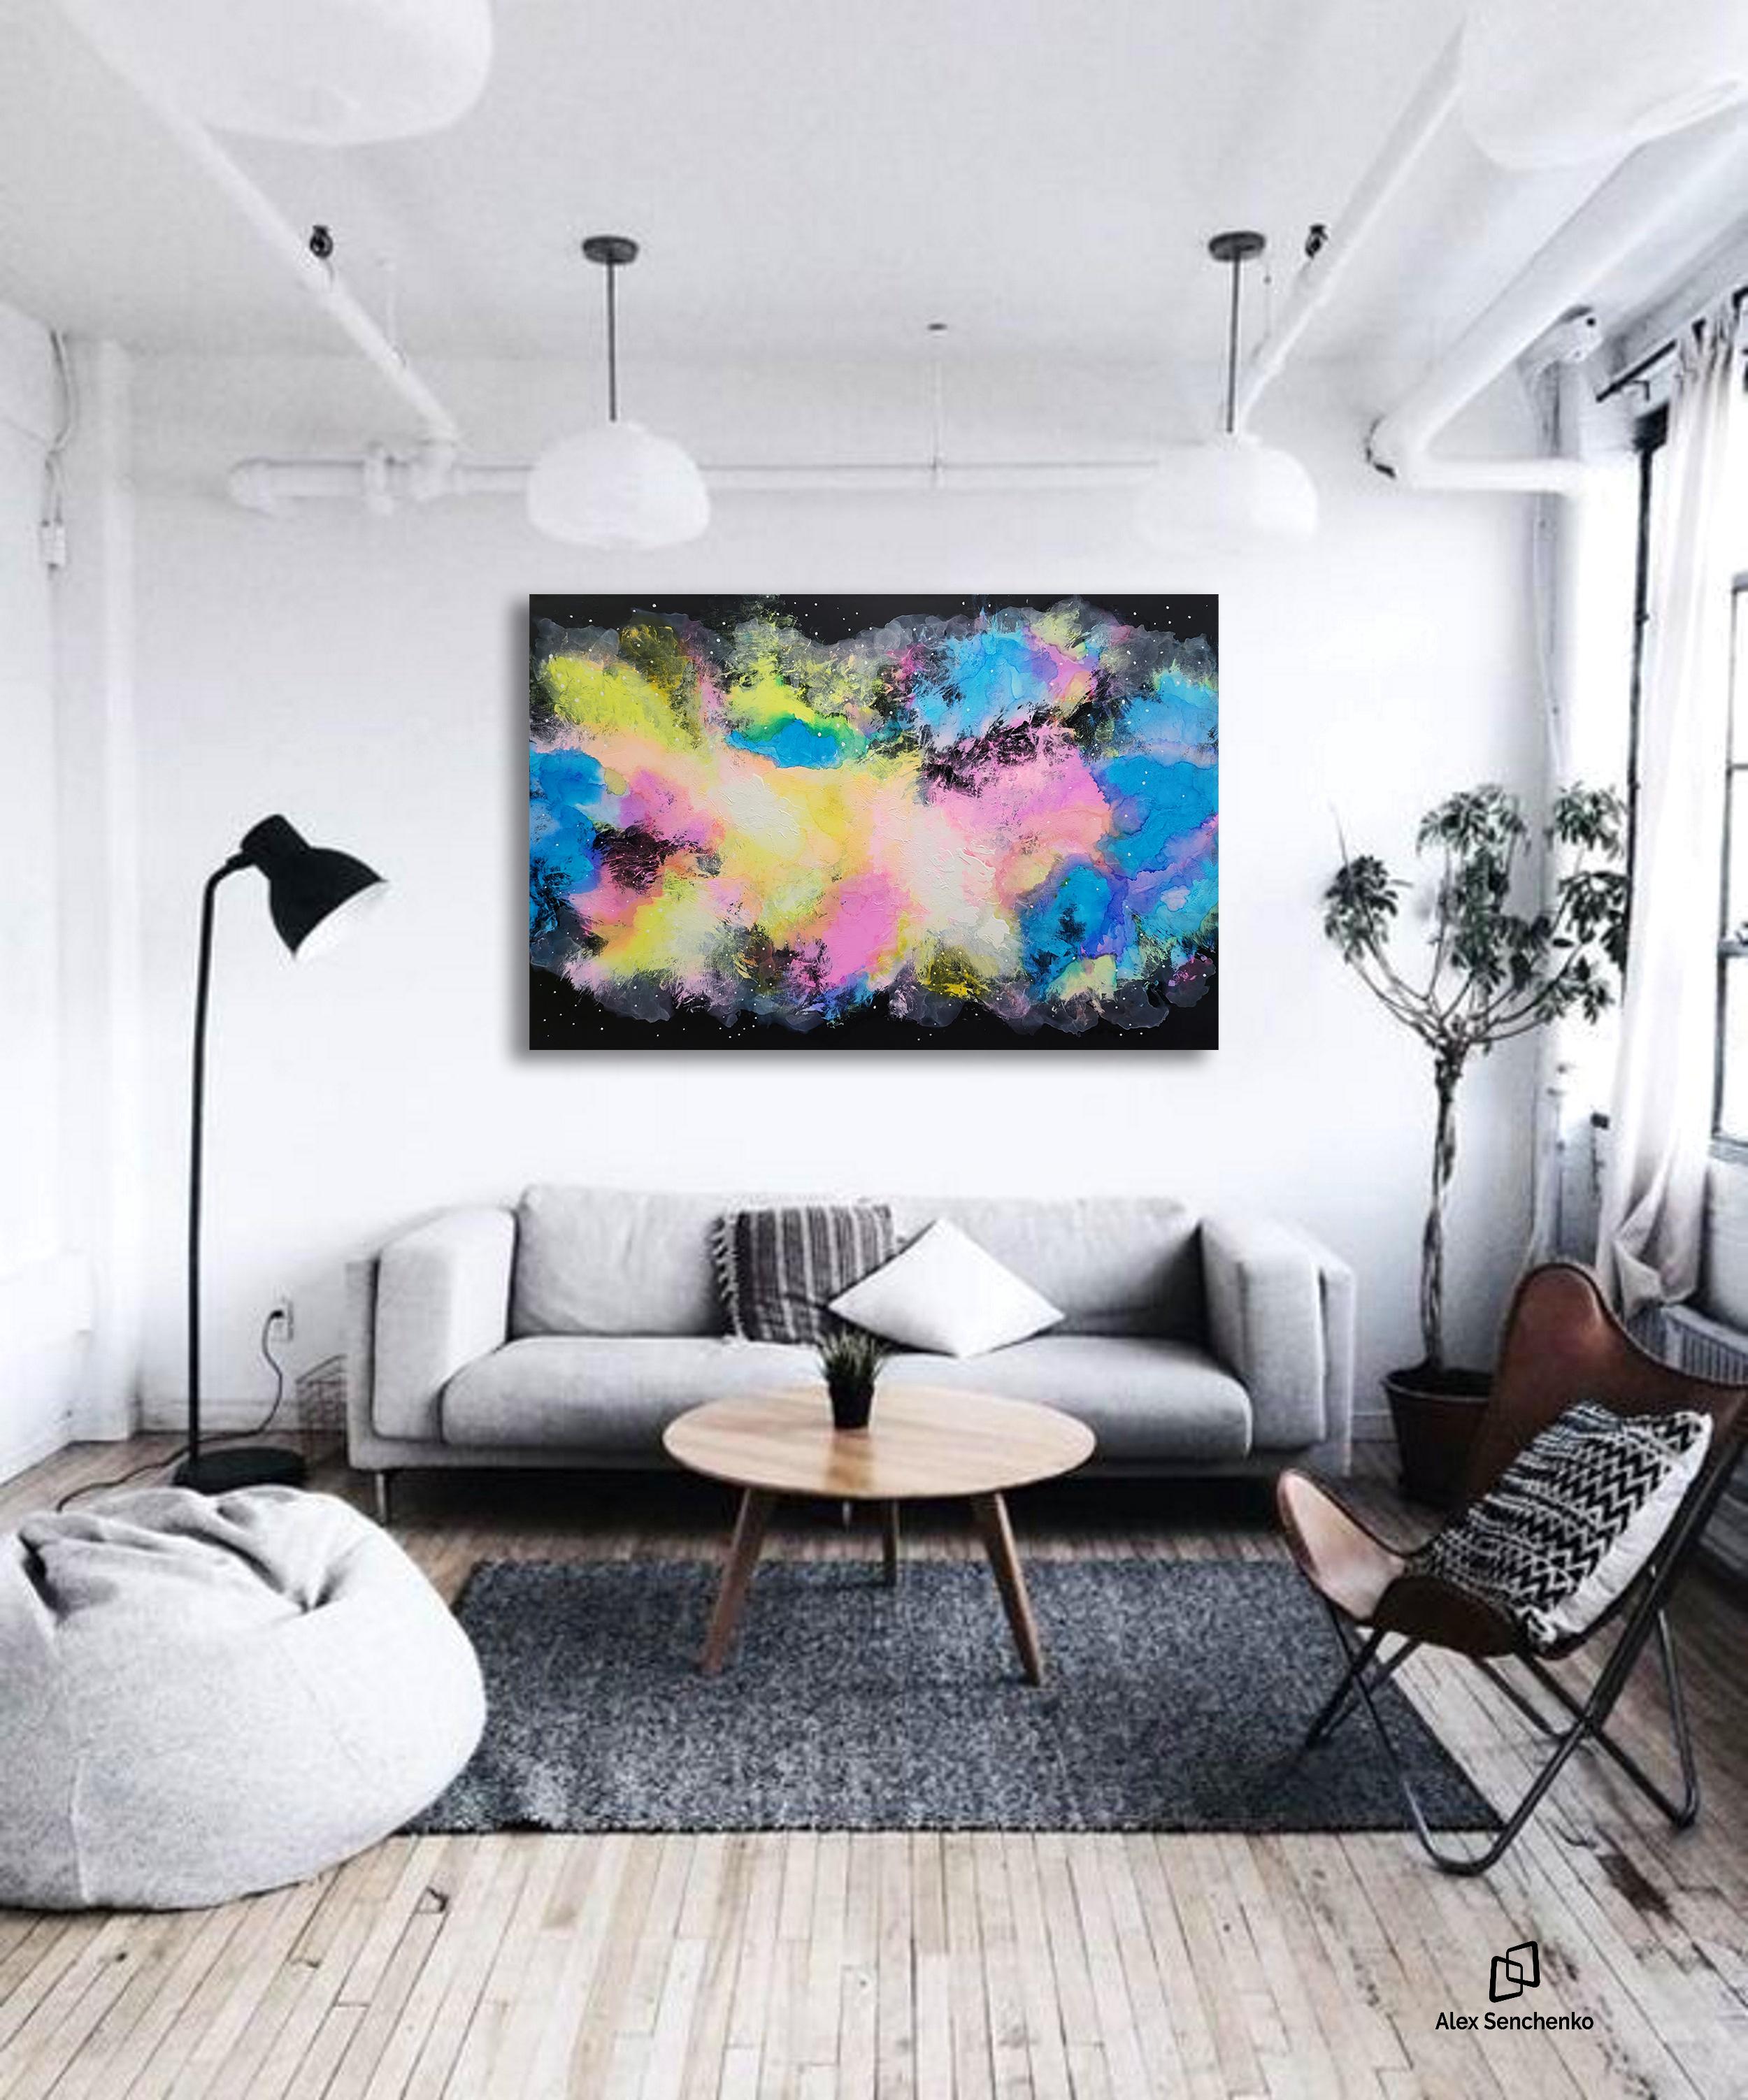 There’s something different about the homes of creative people. They like to surround themselves with inspiring things, from unique tablecloths to the incredible paintings on the walls. Alex Senchenko’s - Exhibit 2203 - can give your home that